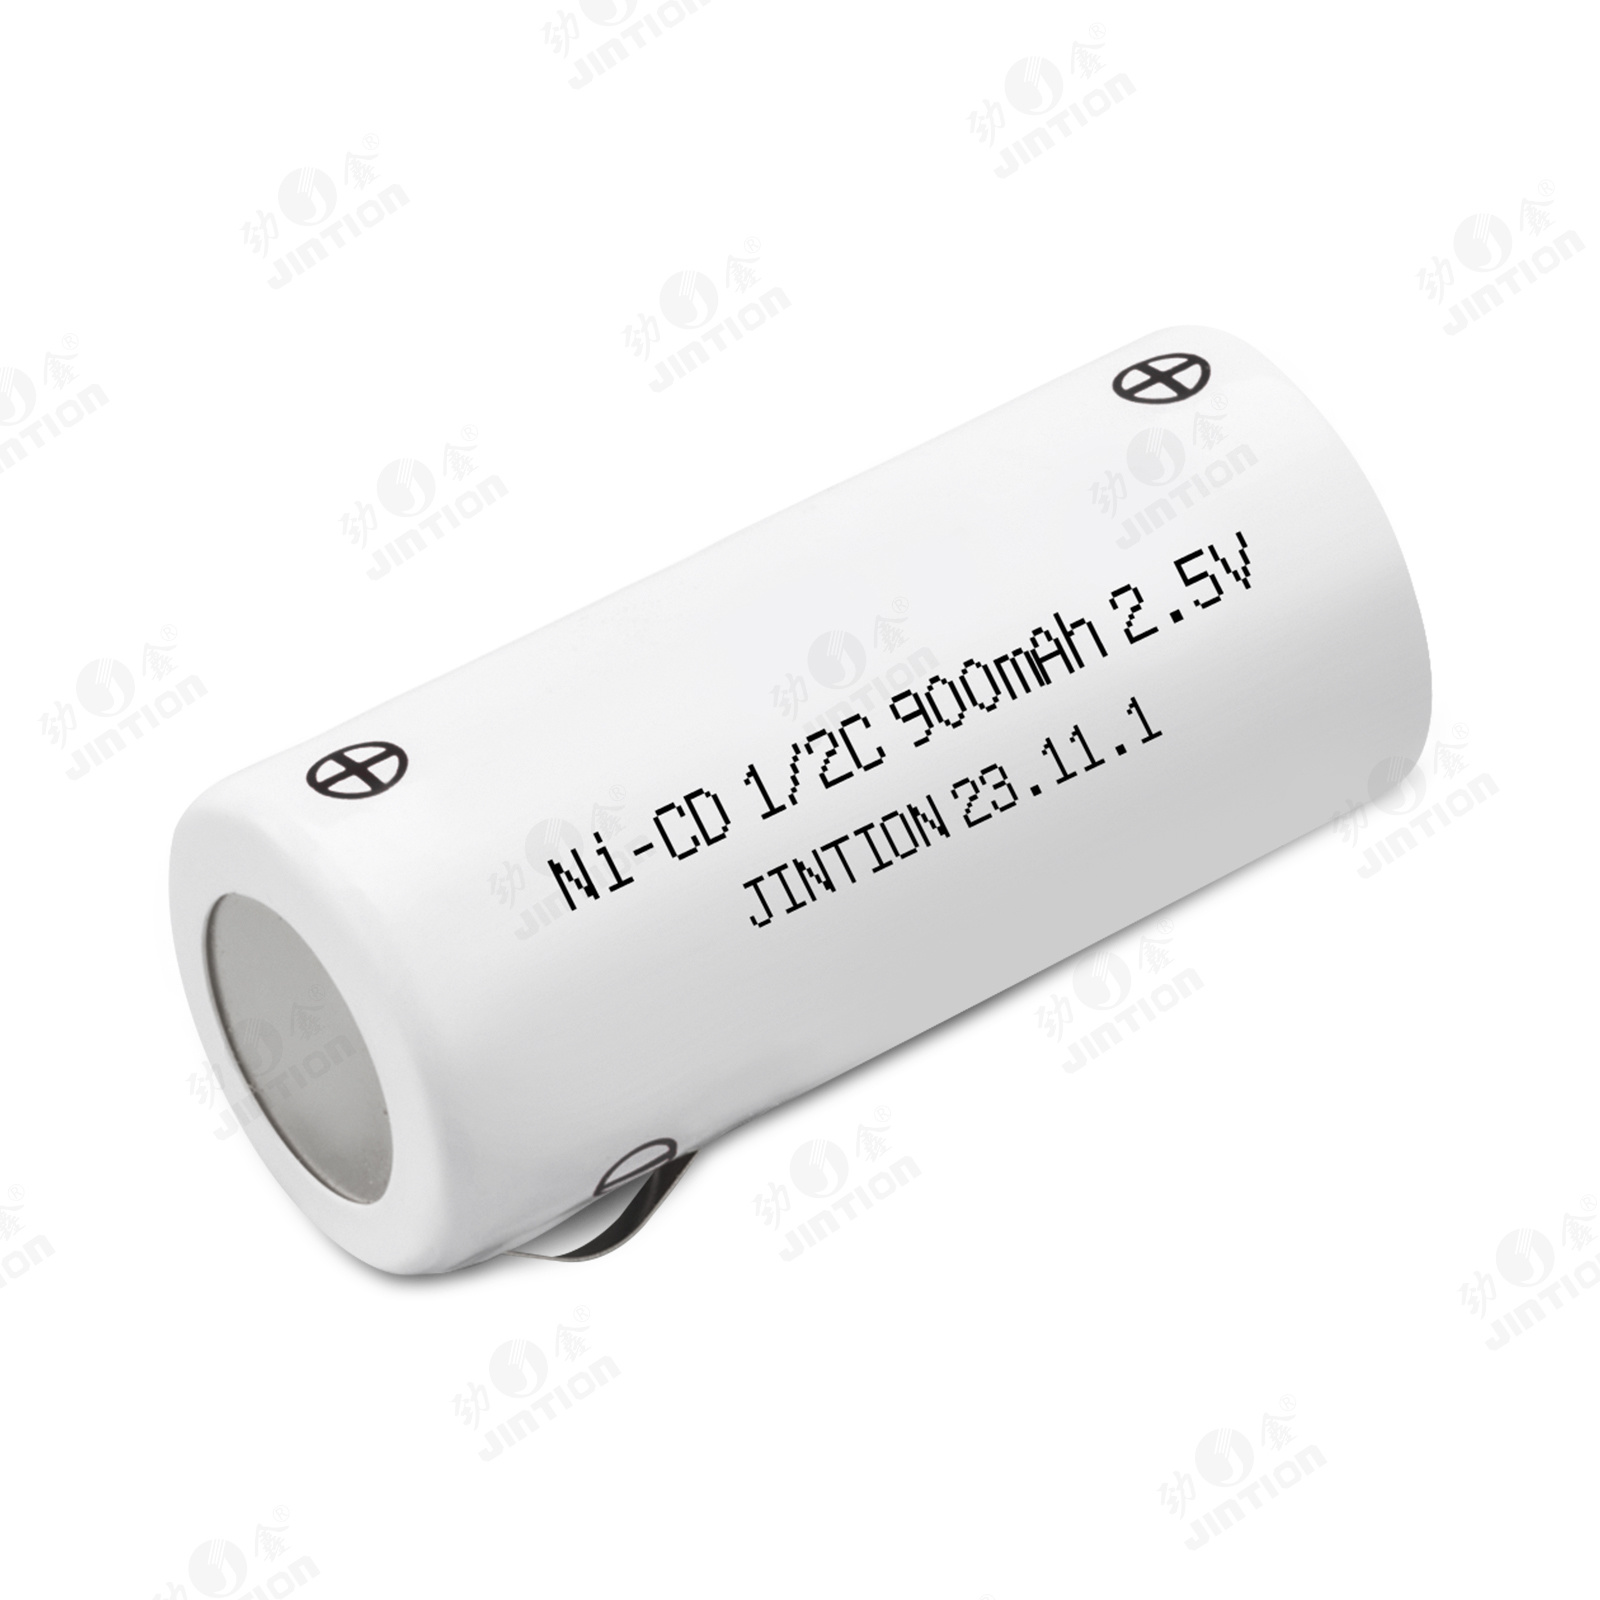 JINTION NICD 1/2C 900MAH 2.5V nicd battery pack 2.4 v nickel cadmium batteries nicd for Welch Allyn devices